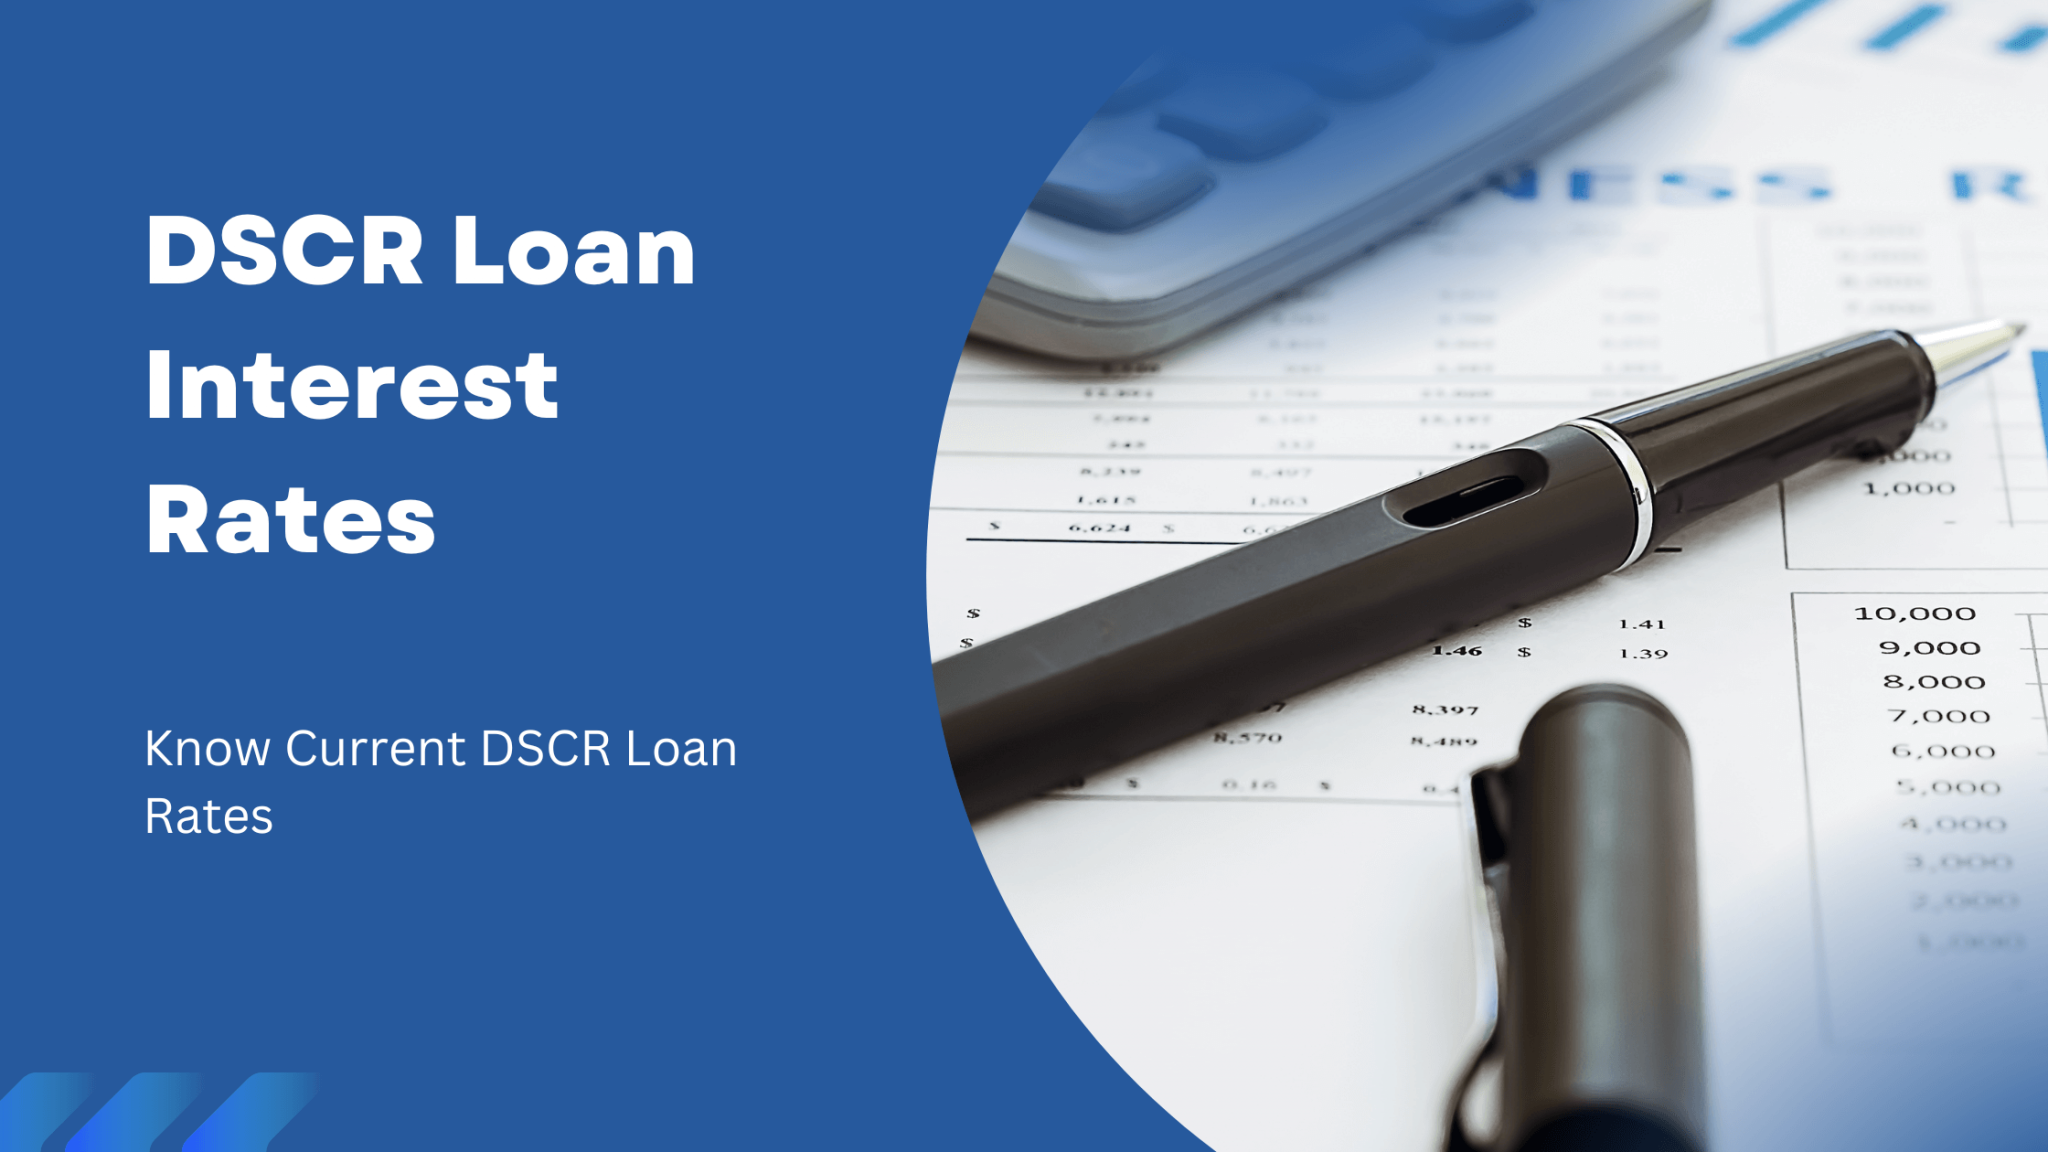 Know Latest DSCR Loan Interest Rates - Get Lower Rates!